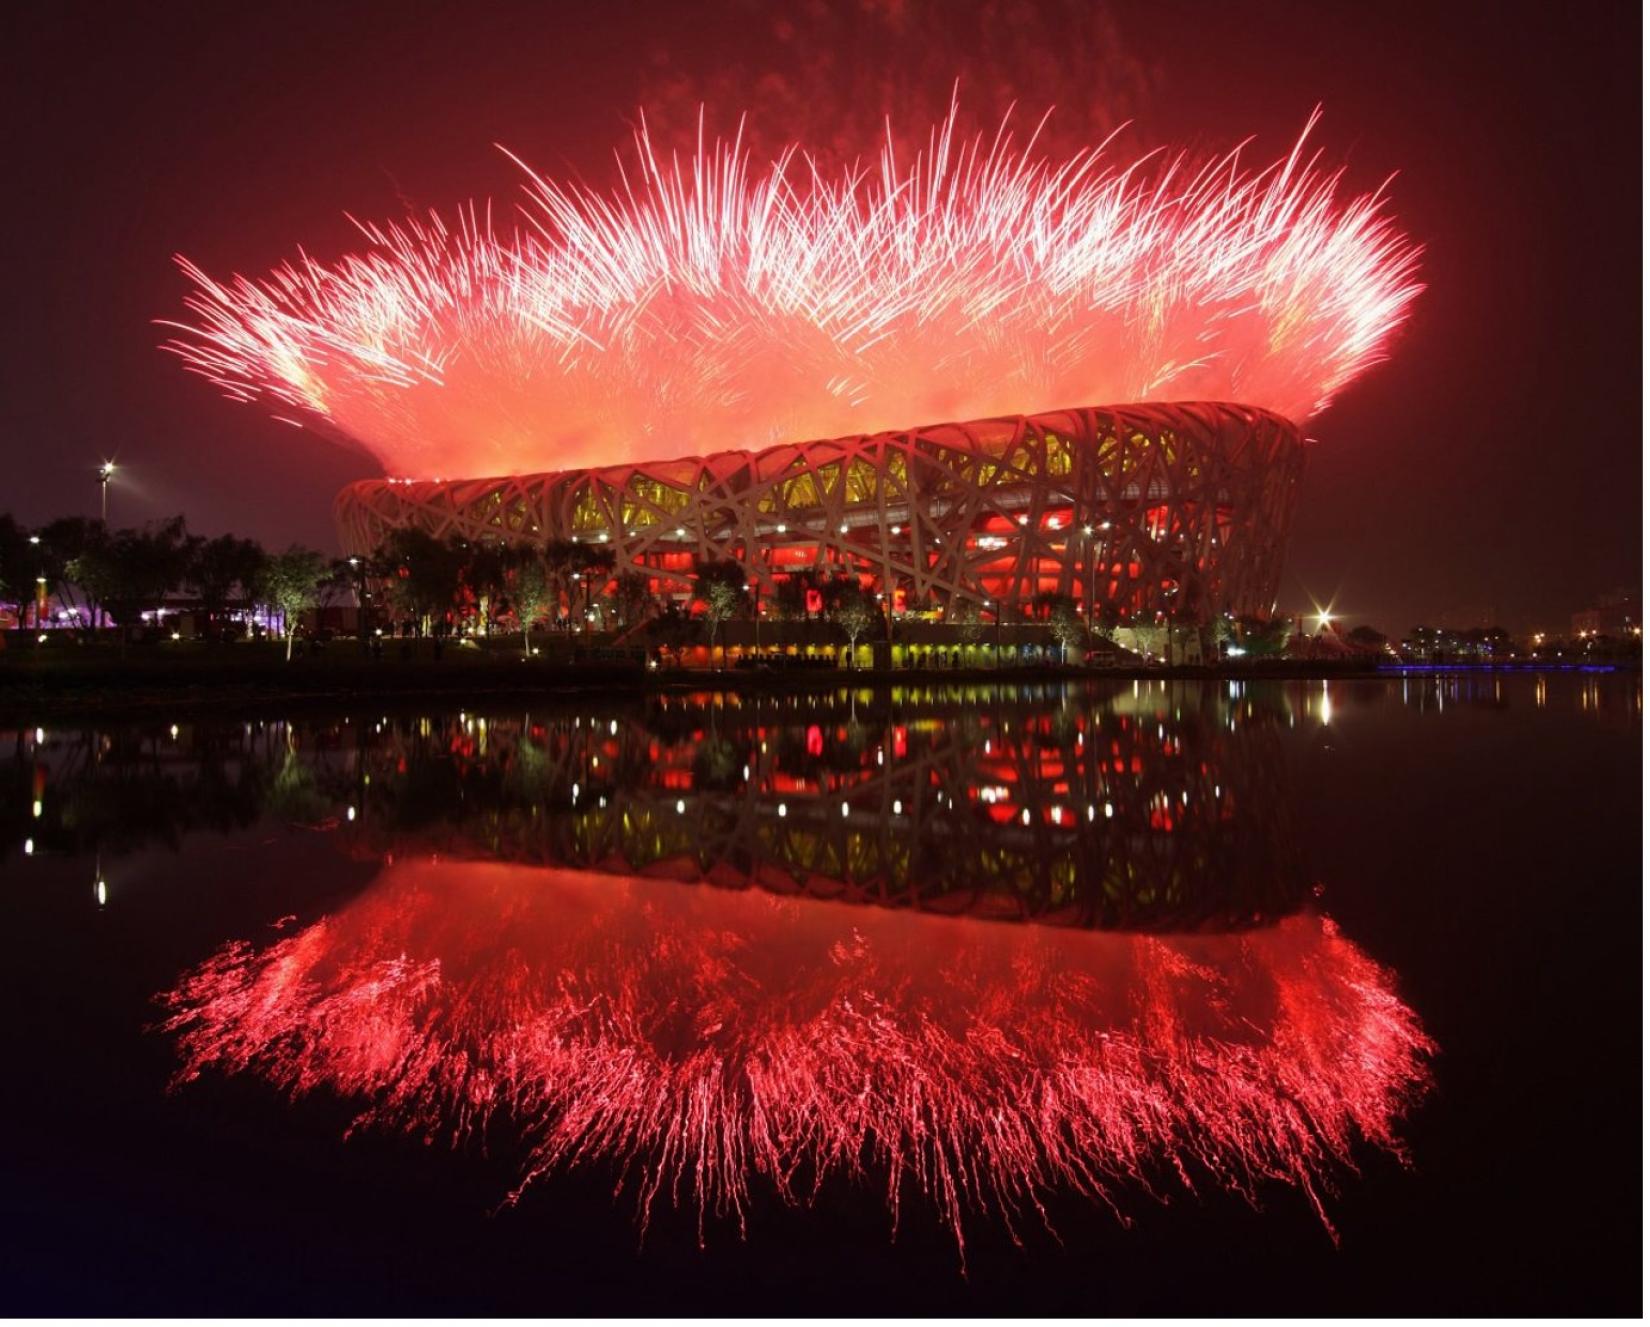 Caption- A still from the opening ceremony of the 2008 Beijing Olympics. /VCG Photo